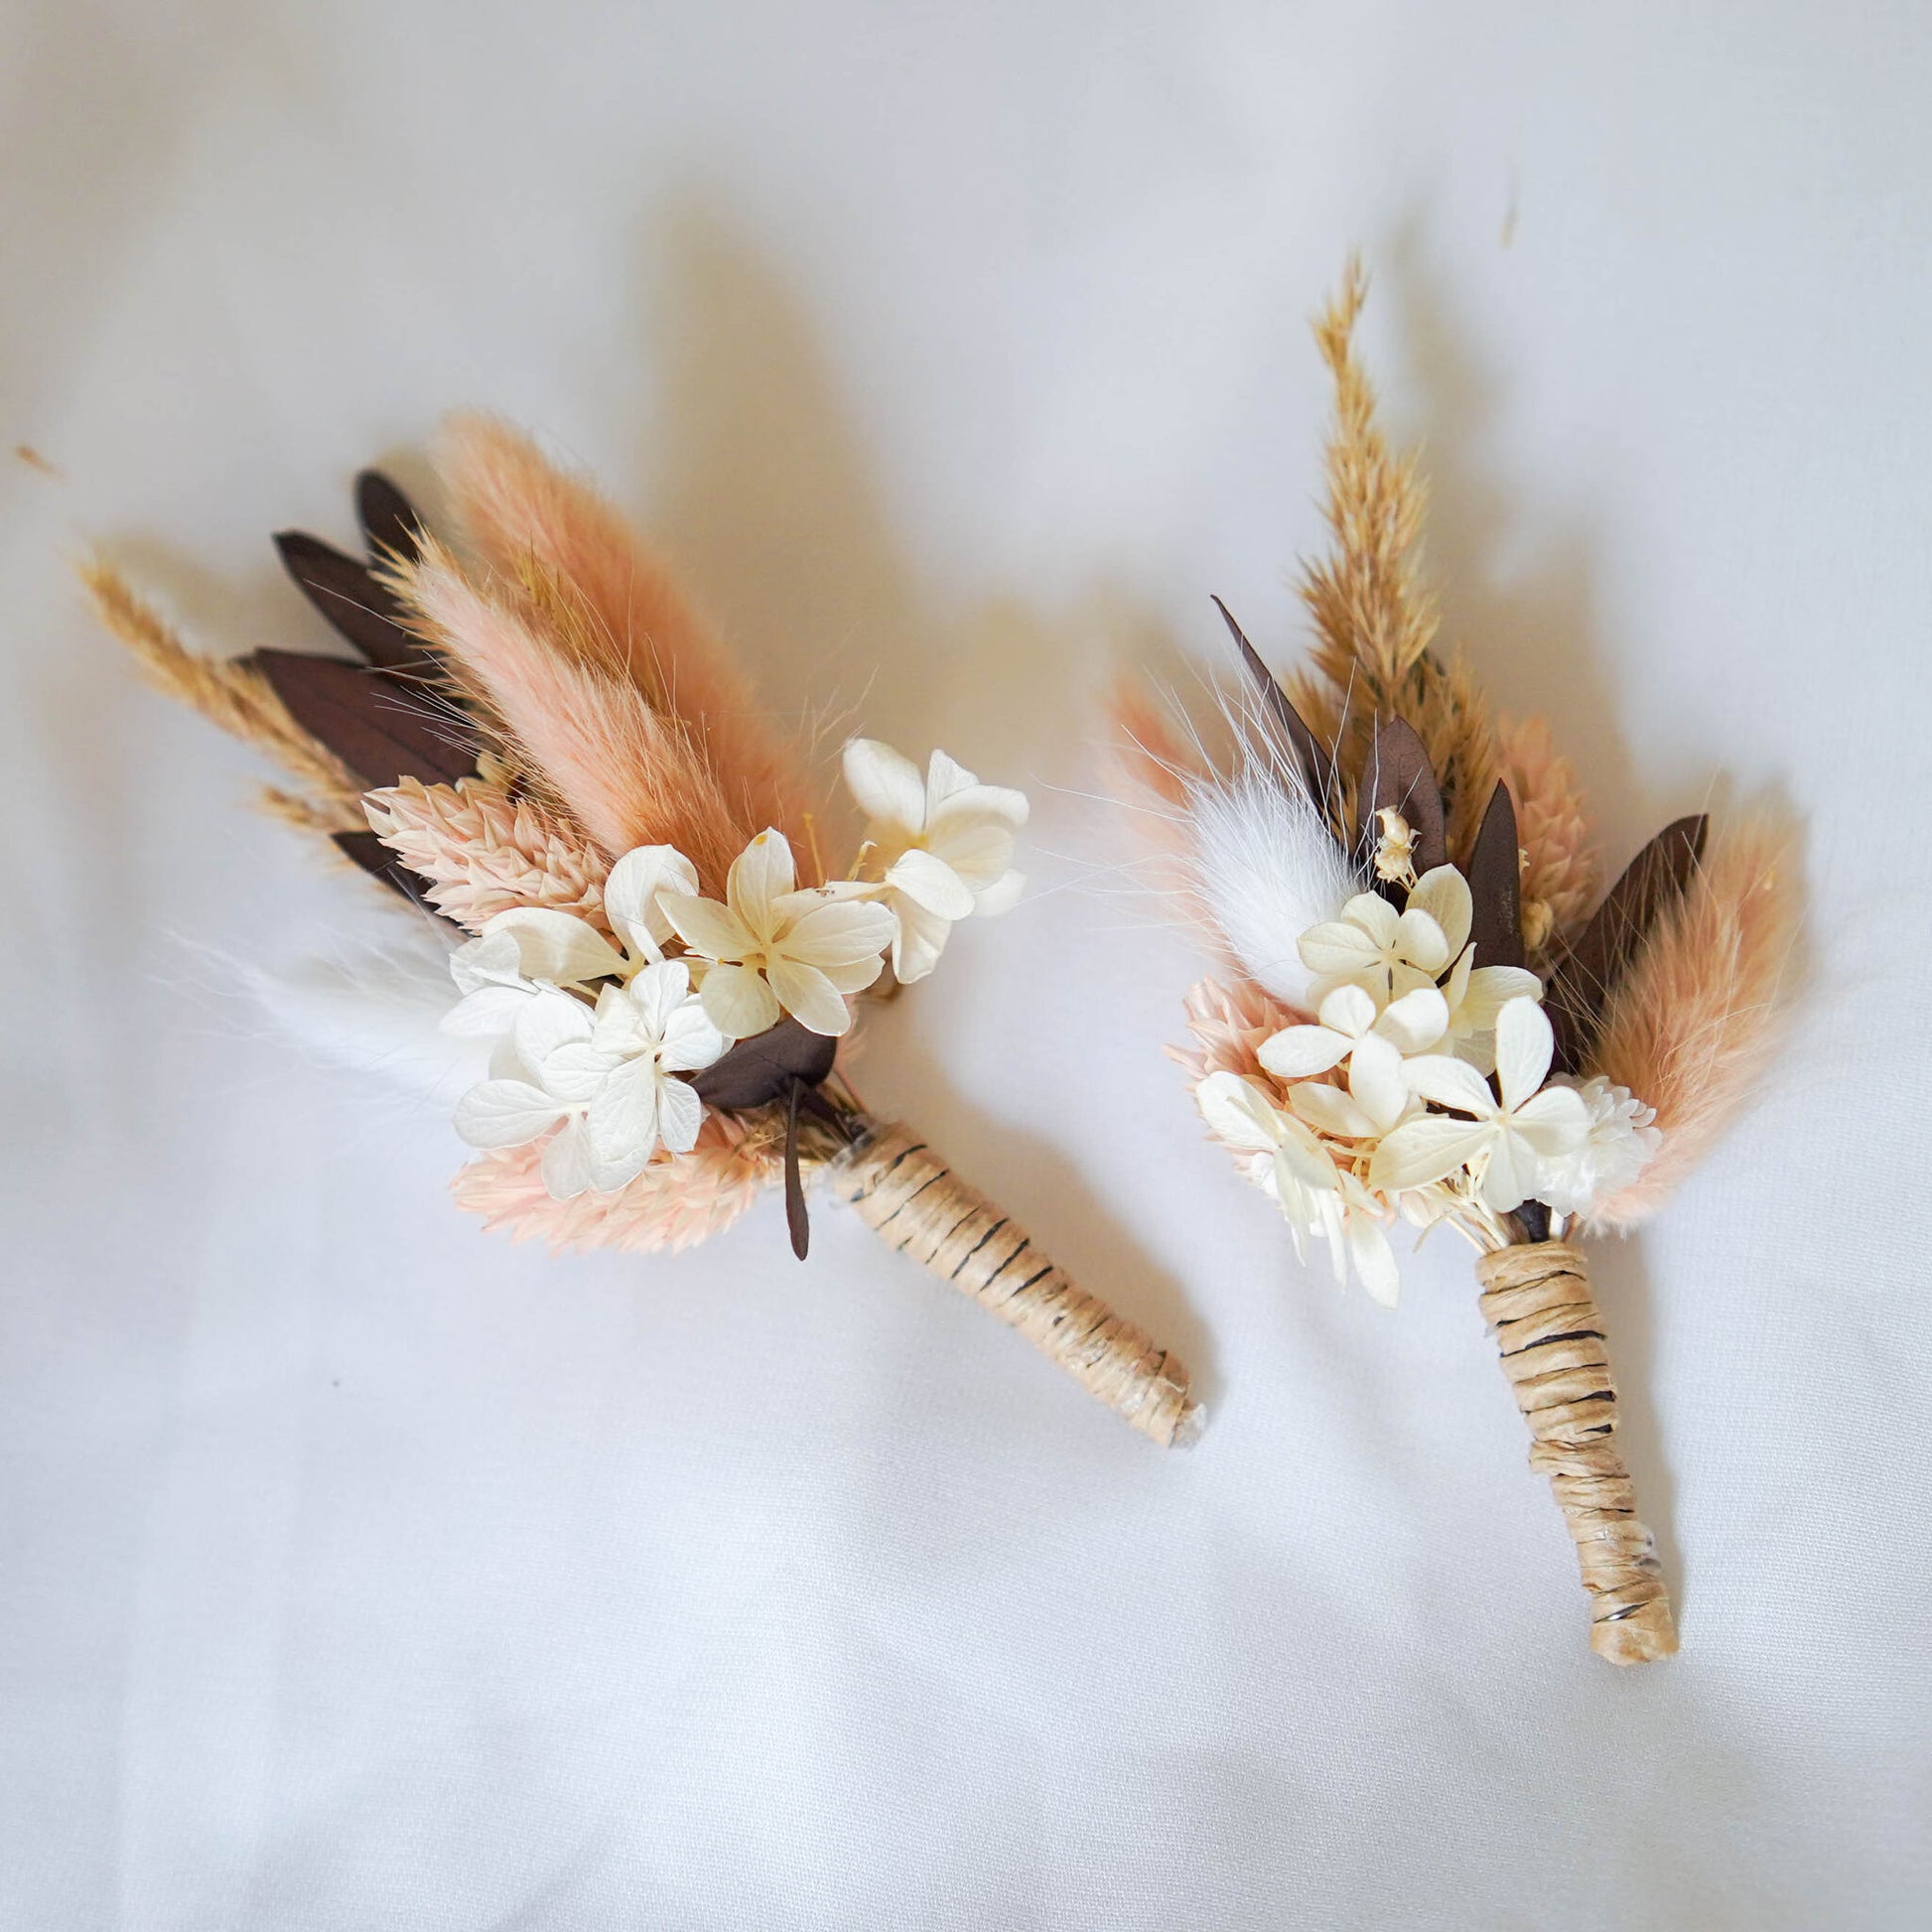 Pin on Dried Flowers